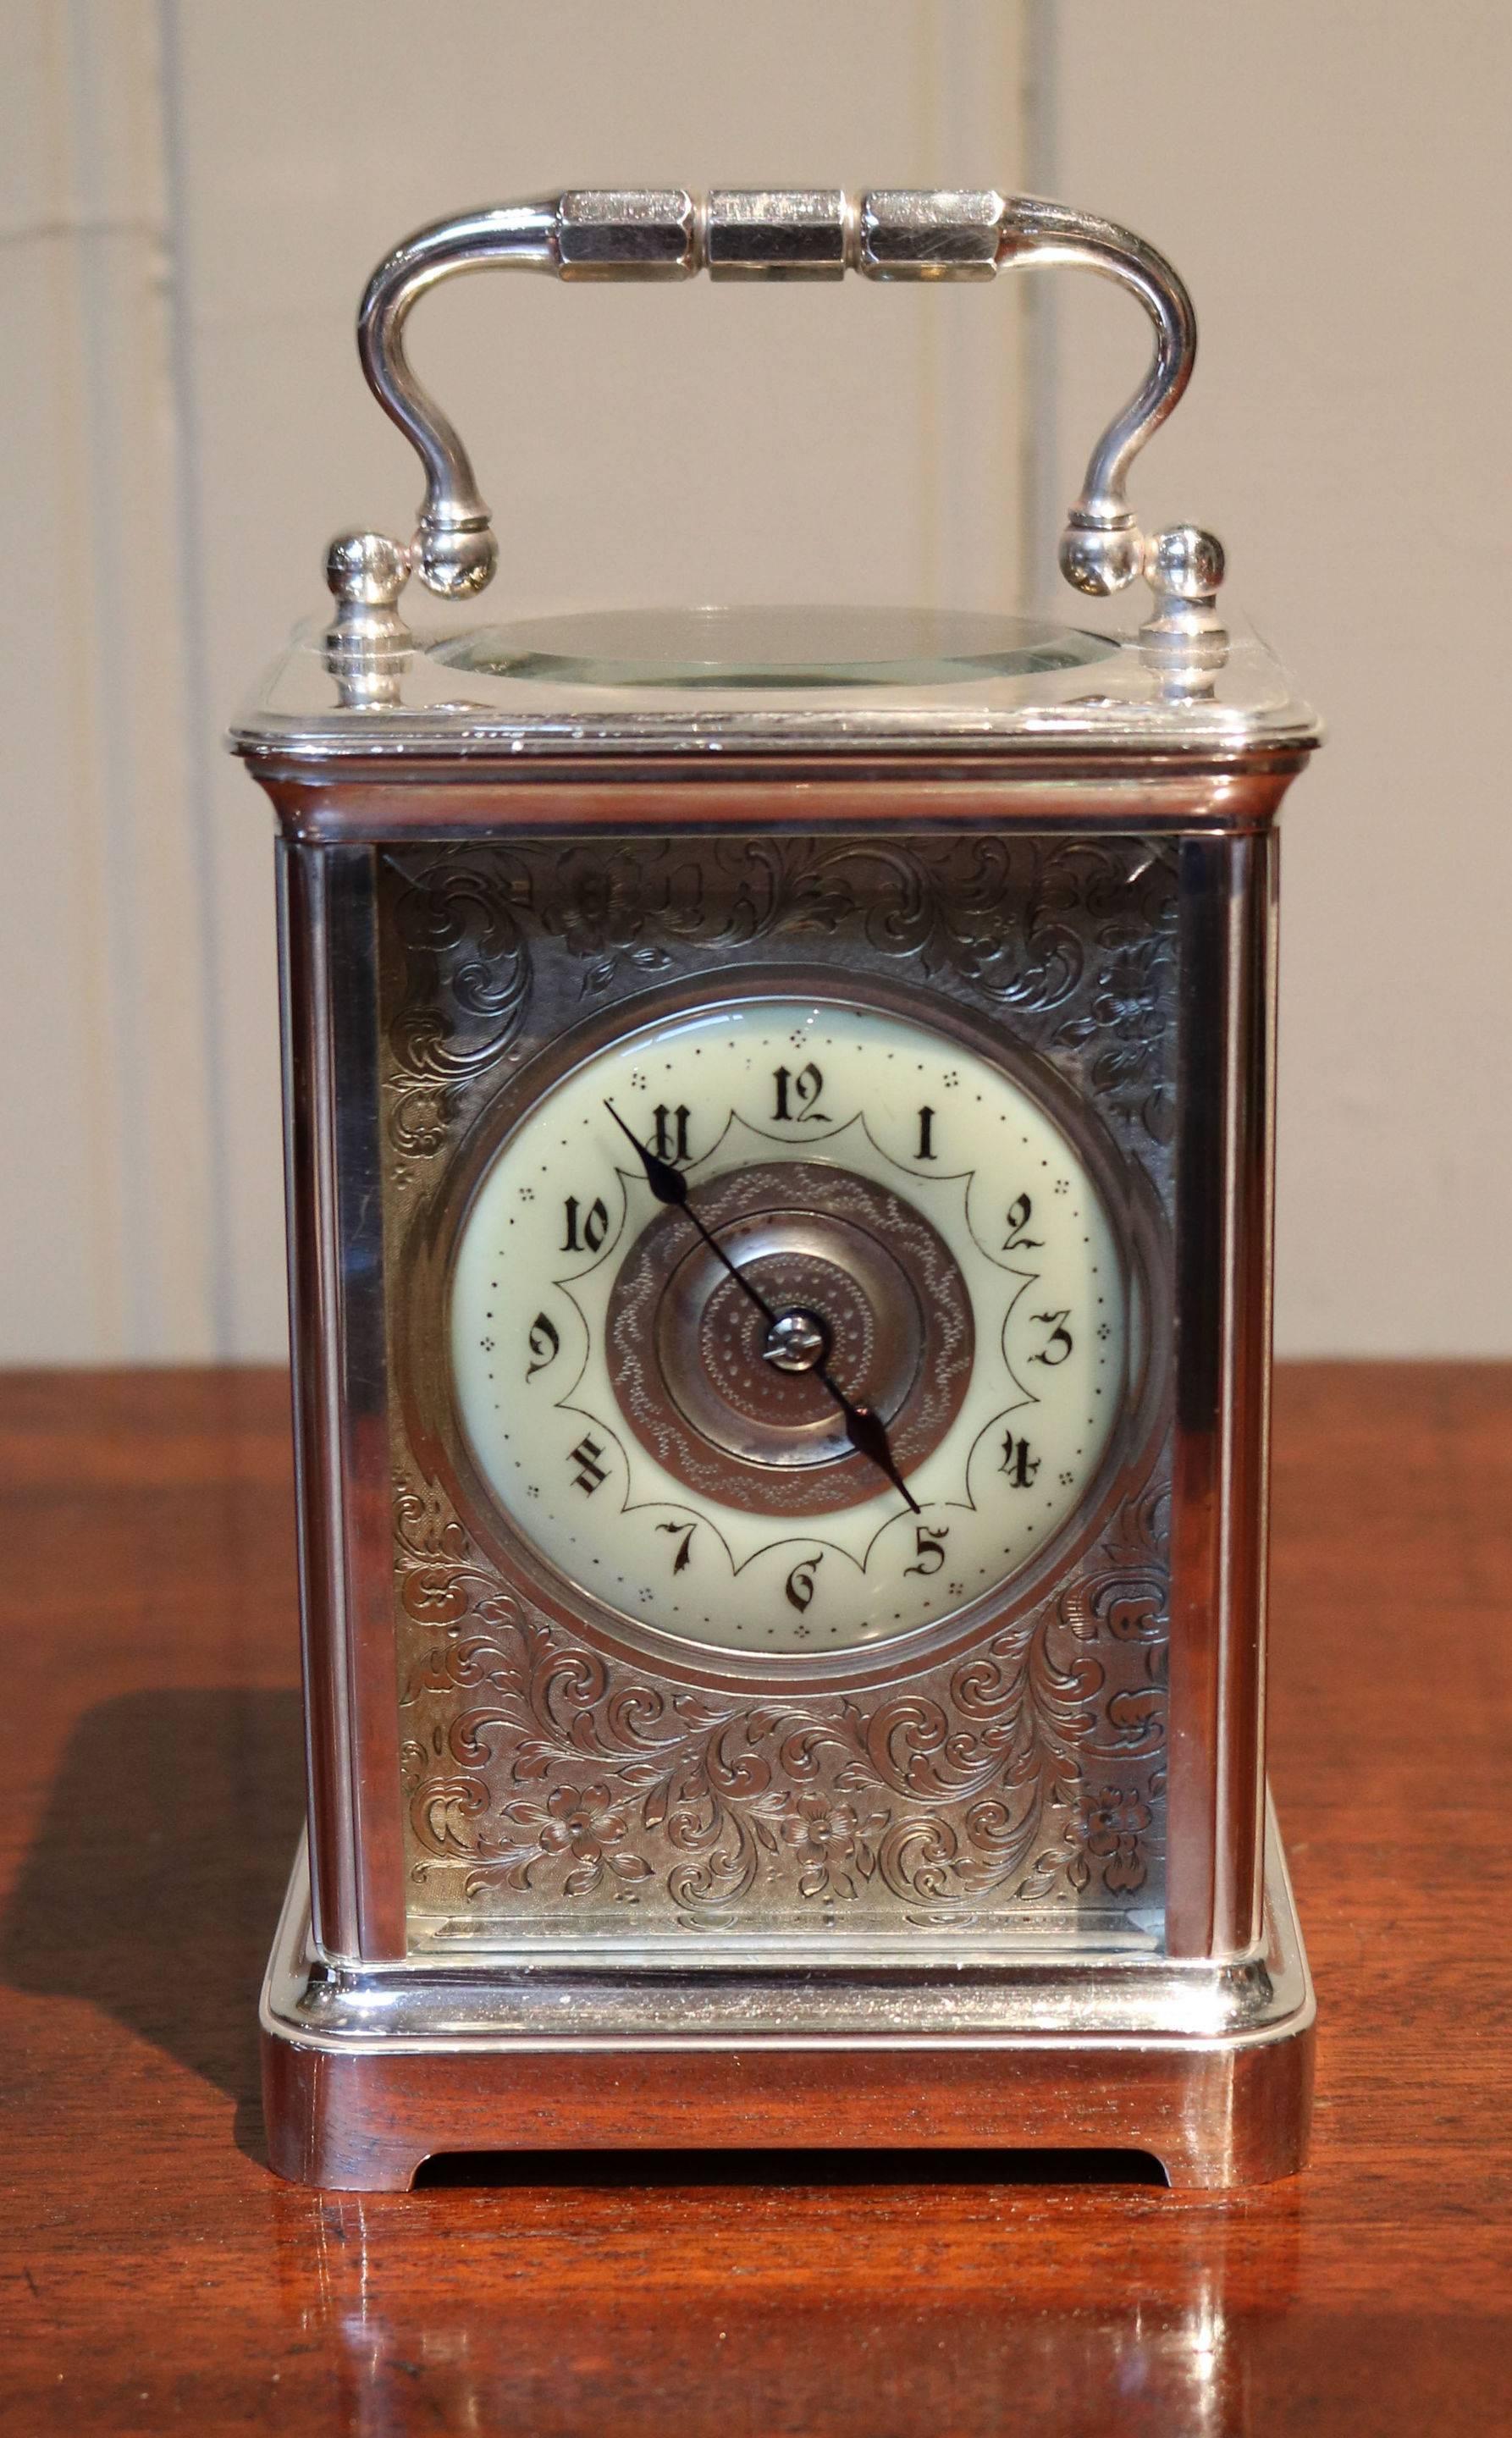 An attractive silver plated carriage clock dating to the late Victorian period. It has a corniche case, with a large bevel edge oval top window. It has an enamel chapter ring and a finely engraved floral dial mask. The 8 day movement has a cylinder